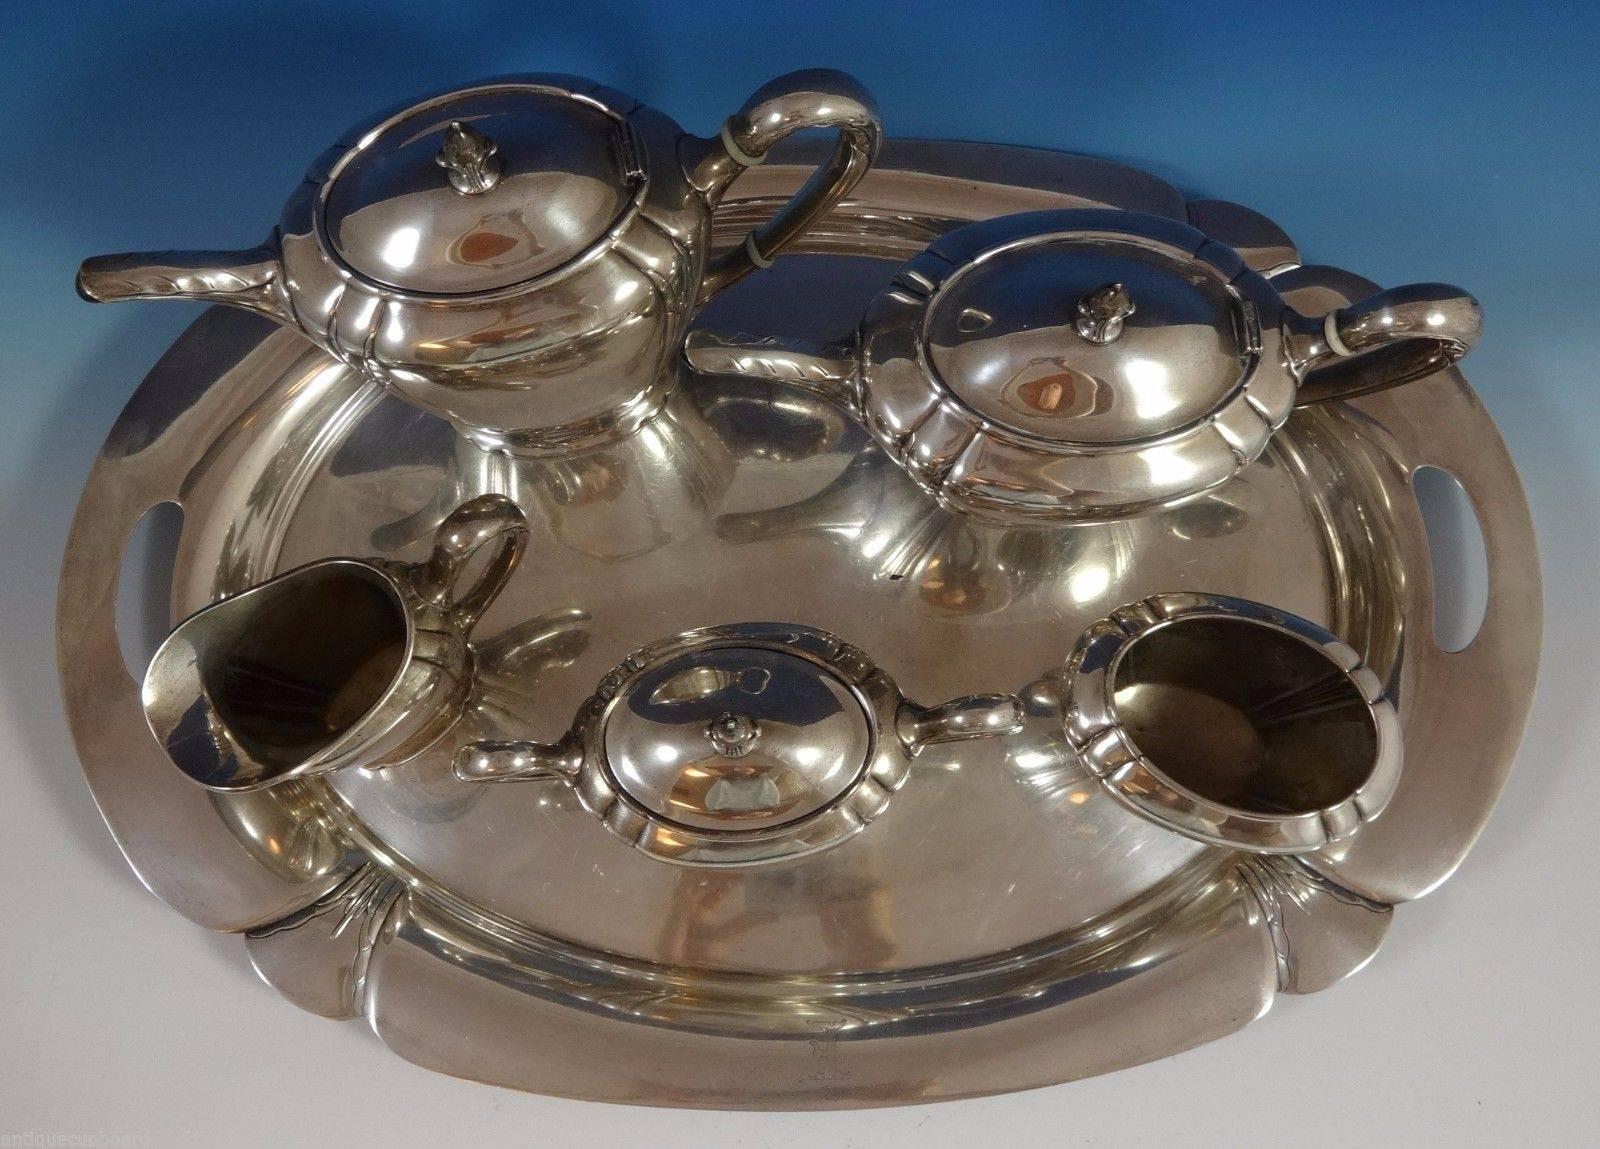 Orchid by International

Modernist Orchid by International sterling silver six pieces set. The five-piece tea set is marked with #C322, and the tray is marked with #W300-23. The set includes:

Coffee pot: Holds 10 cups, measures 9